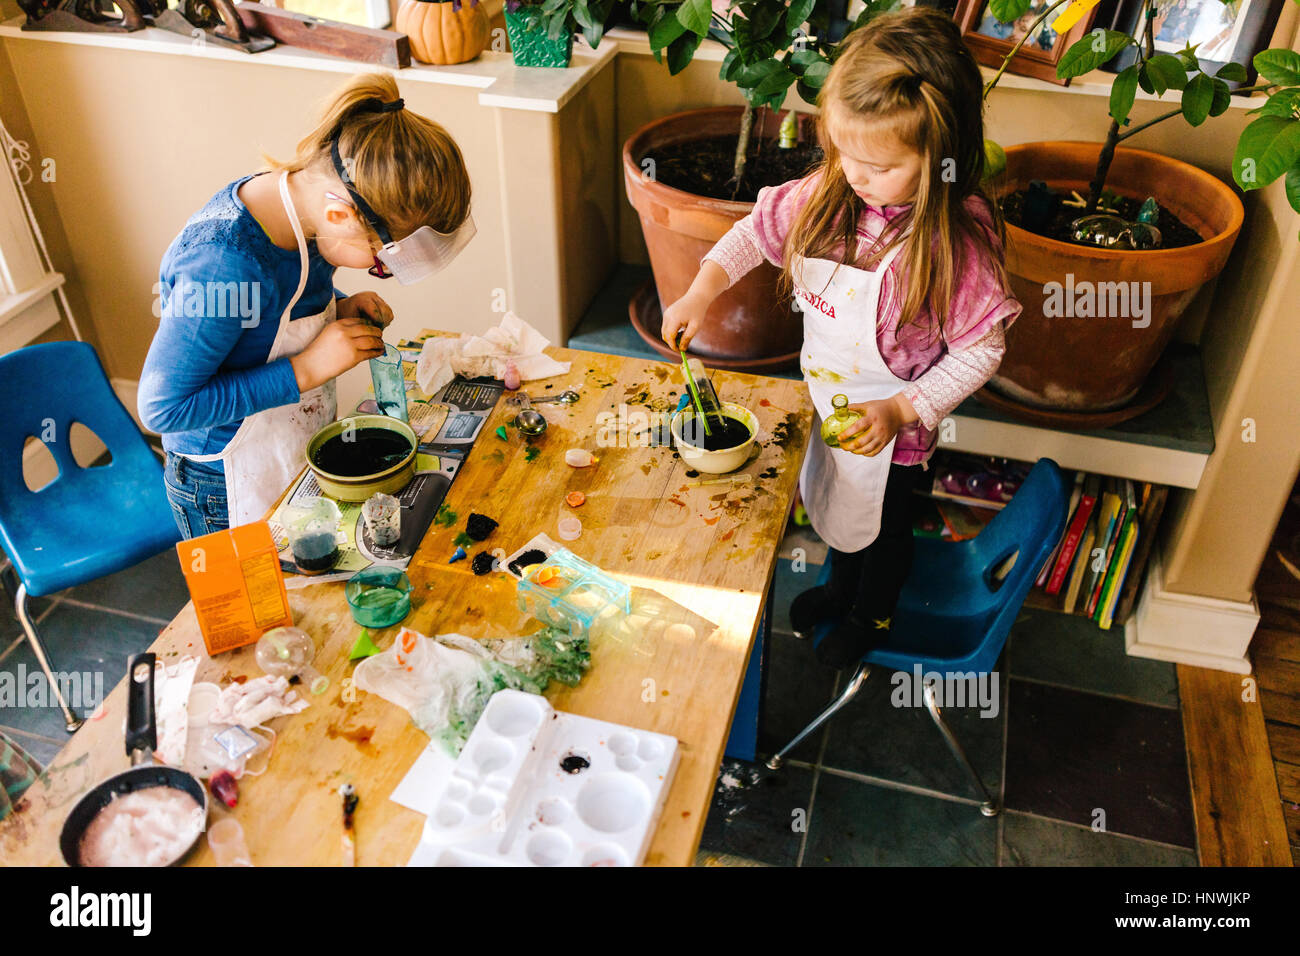 Two girls doing science experiments at messy table Stock Photo